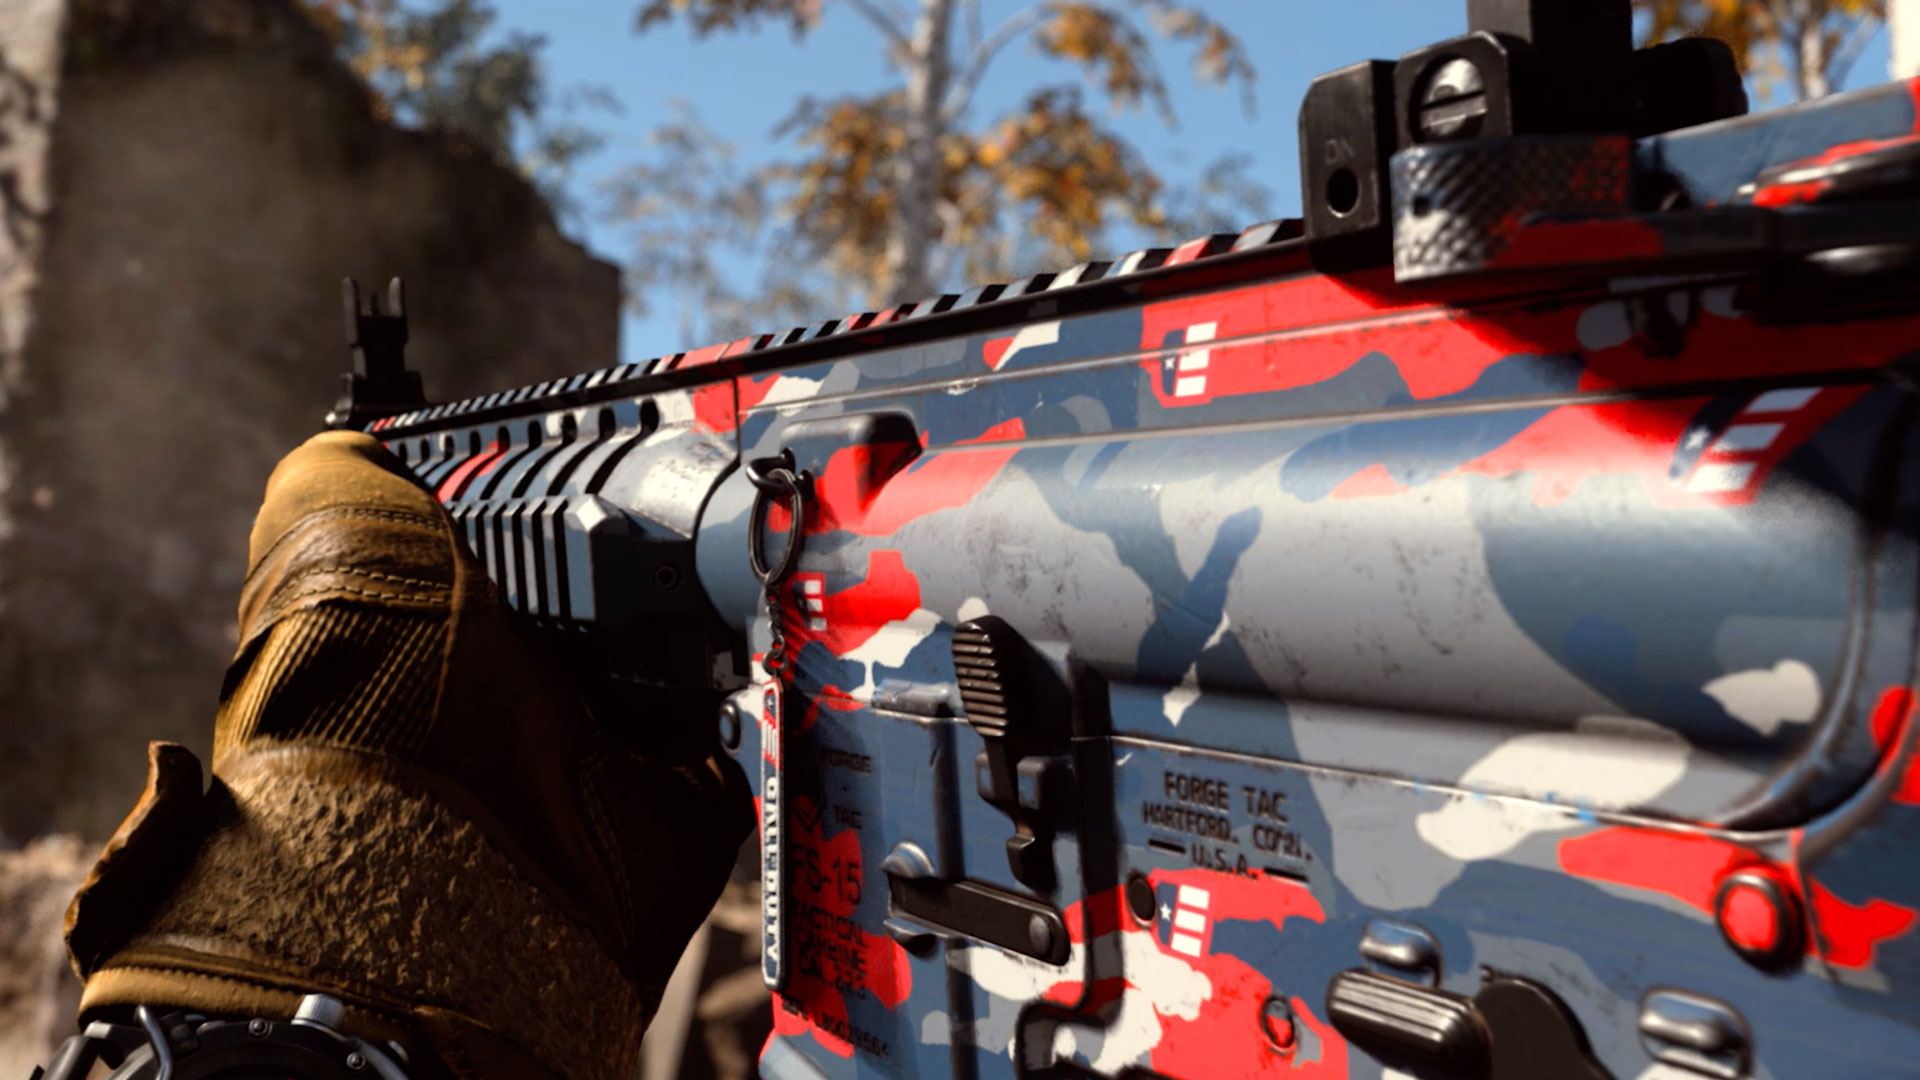 The Call of Duty Endowment Defender Pack is available now in ... - 